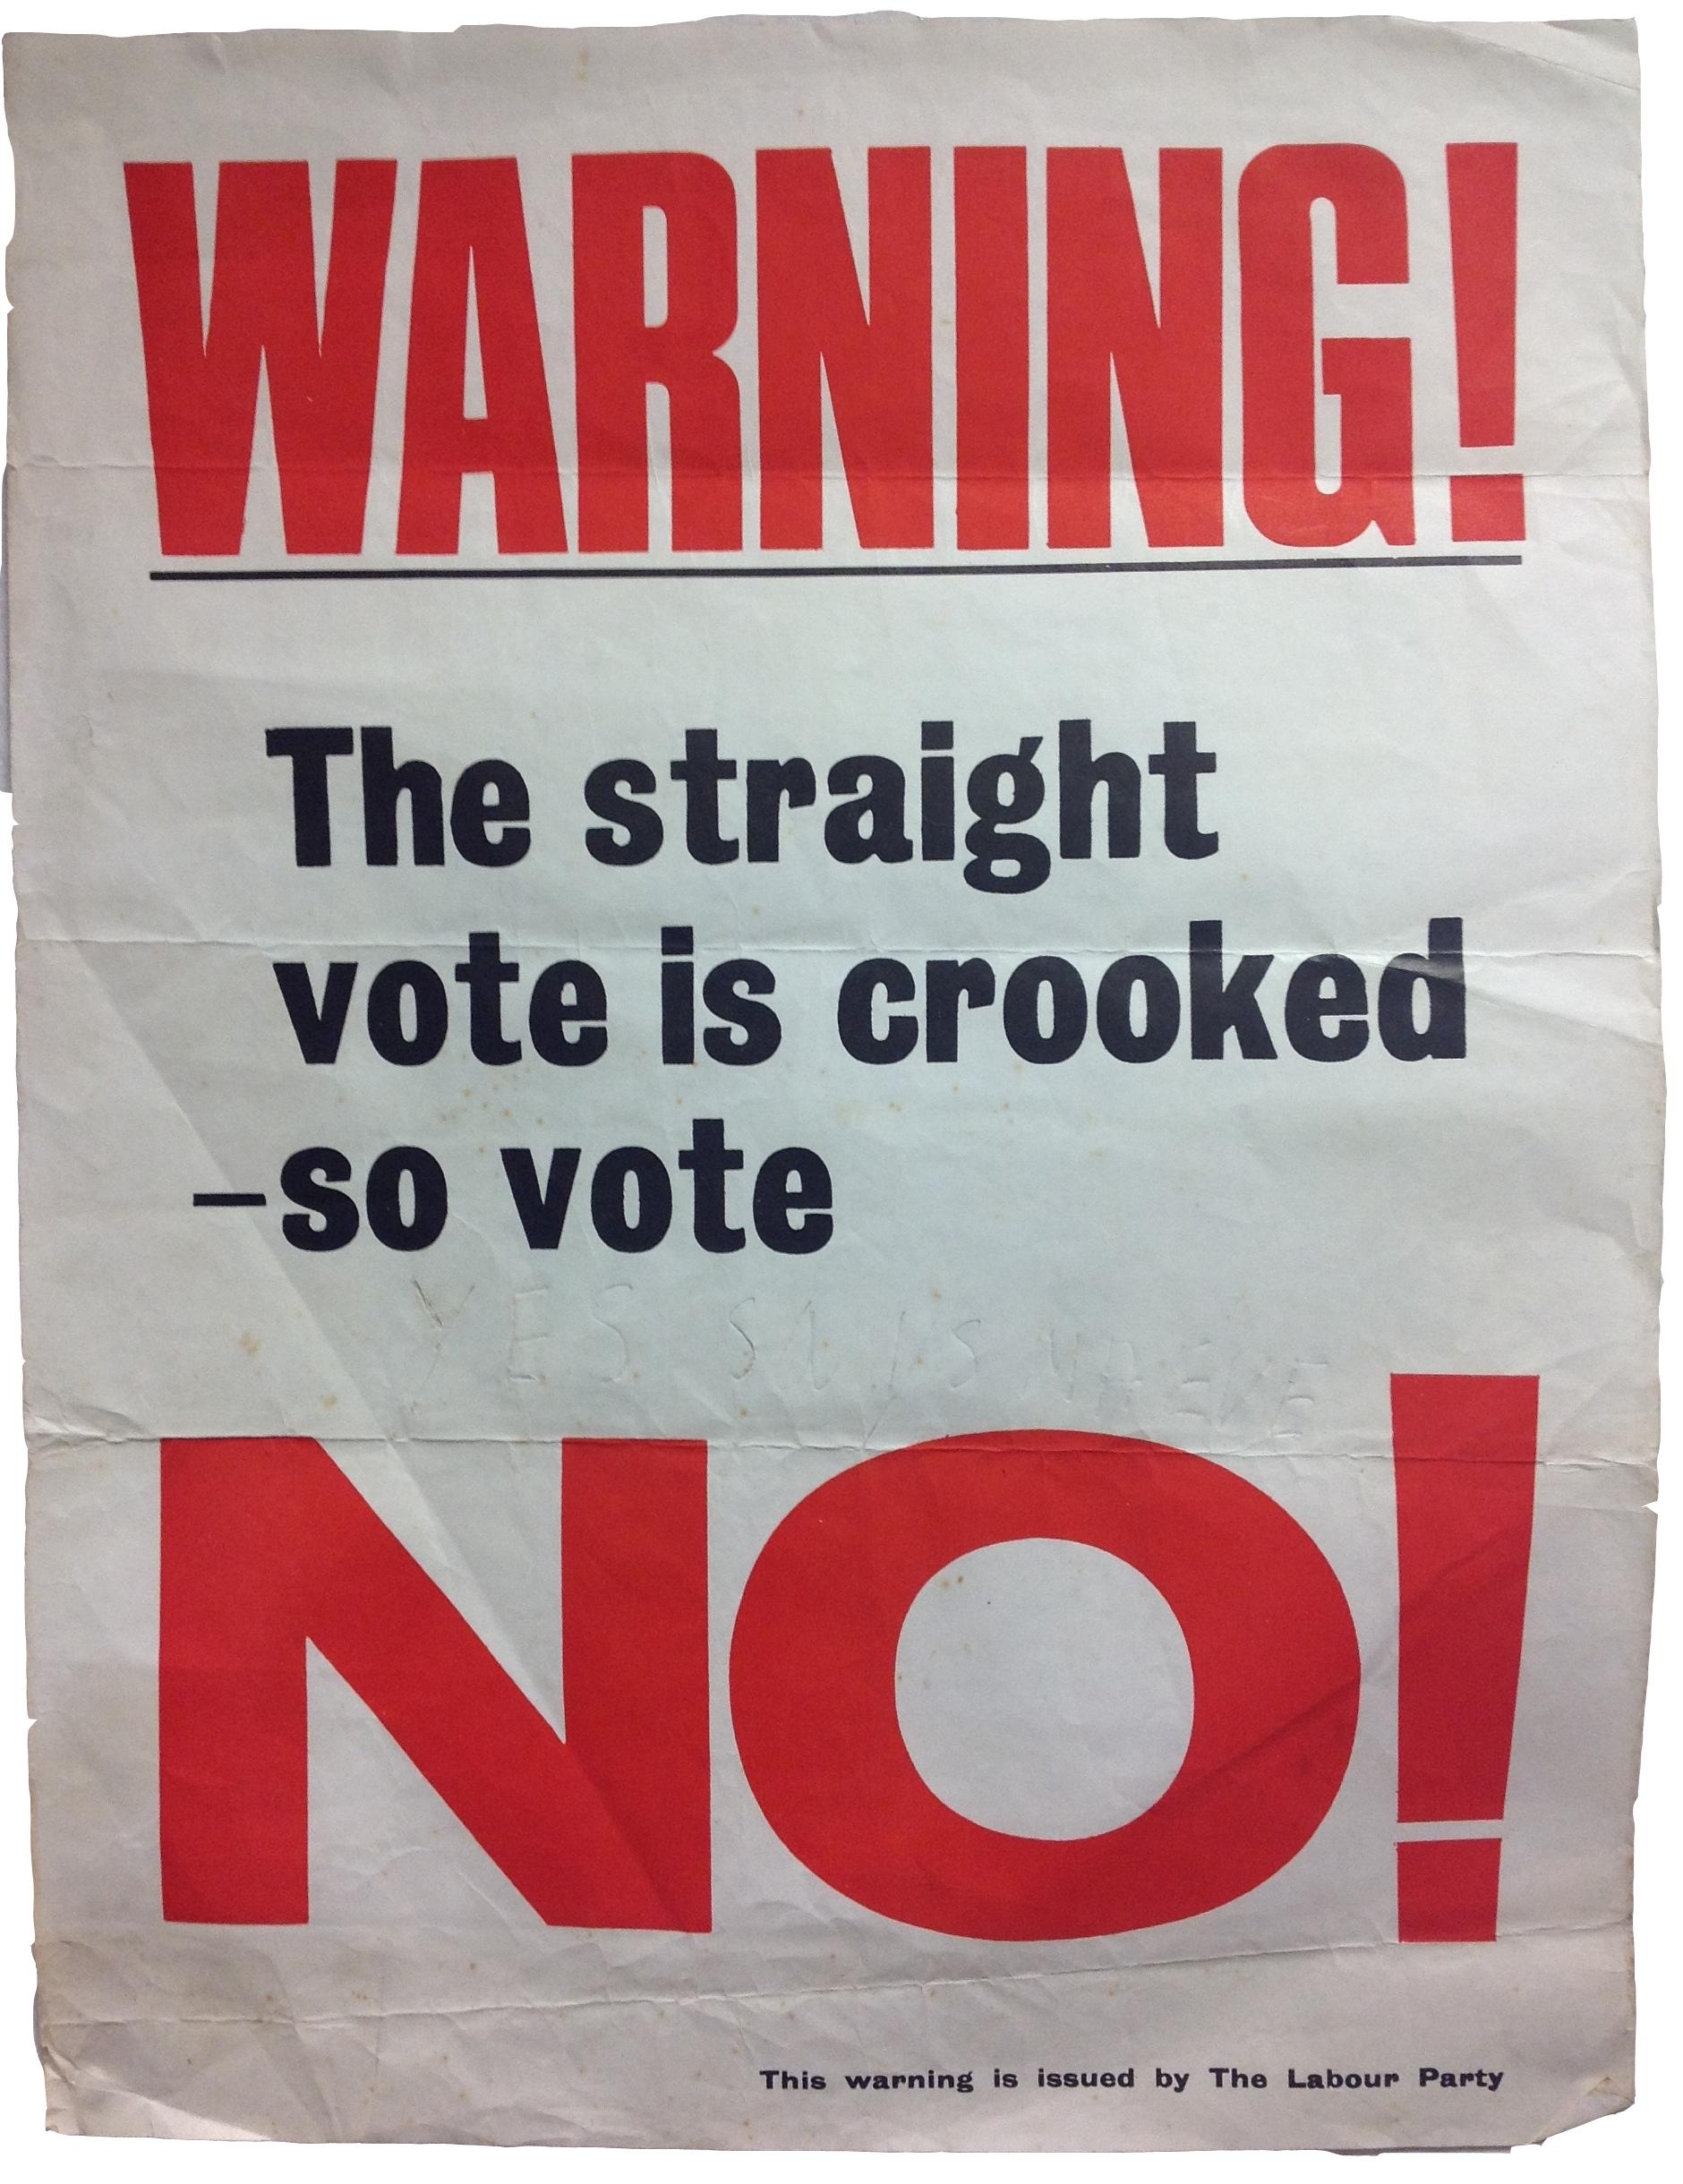 A scan of a poster with red and black text on a white background, reading: WARNING!
The straight vote is crooked - so vote
NO!
This warning is issued by The Labour Party